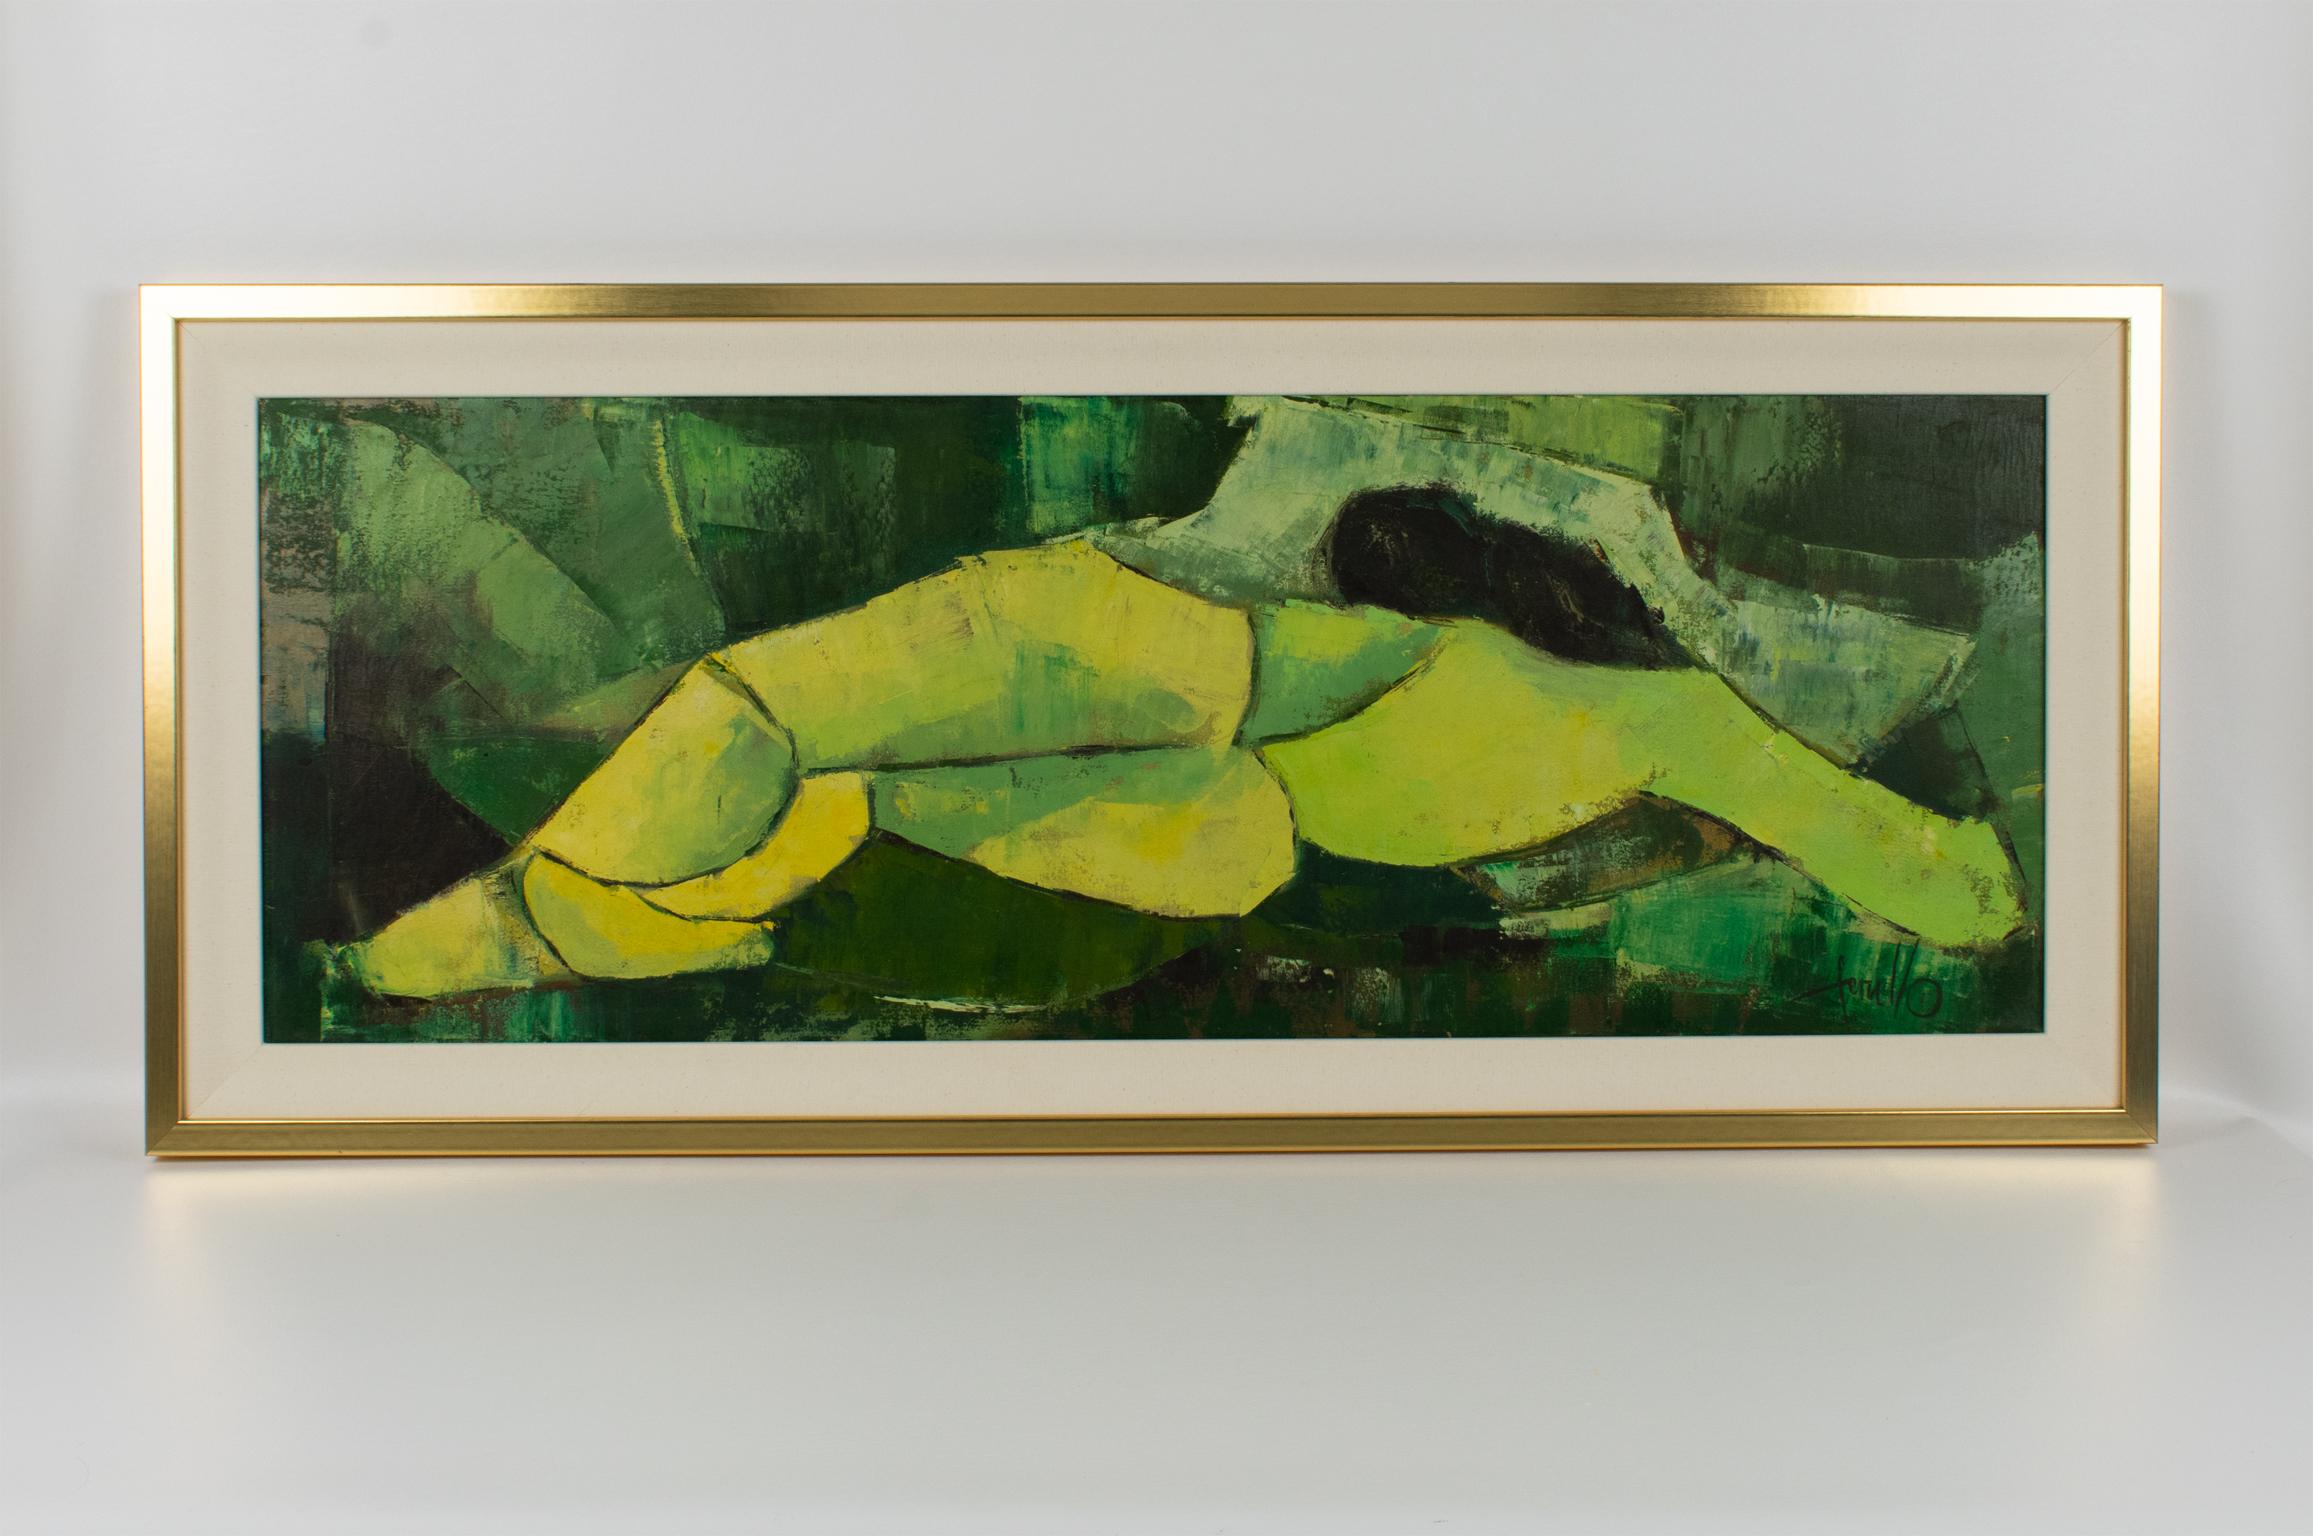 Original Mid-Century oil on canvas composition by American Artist Edith E. Ferullo (1928 - 2008). The painting features a thick textured abstract nude subject. The brutalist artwork incorporates lovely vivid green and yellow hues with defining brush